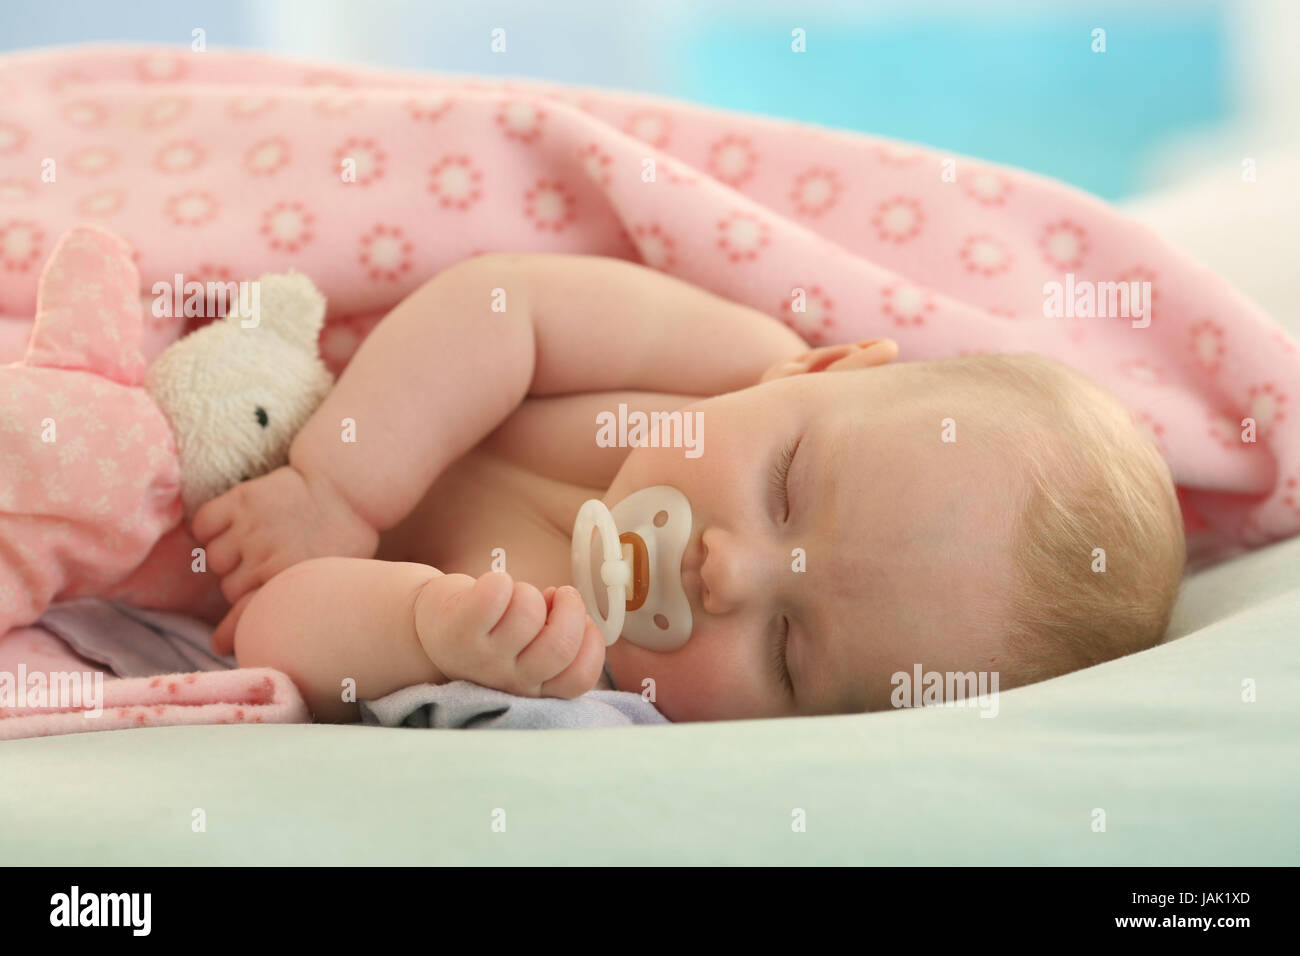 Baby,4 months,dummies,sleep,dream Indoor,girl,person,tiredly,after-lunch sleep,portrait,ceiling,blanket,pink,nonsense animal,rest, Stock Photo